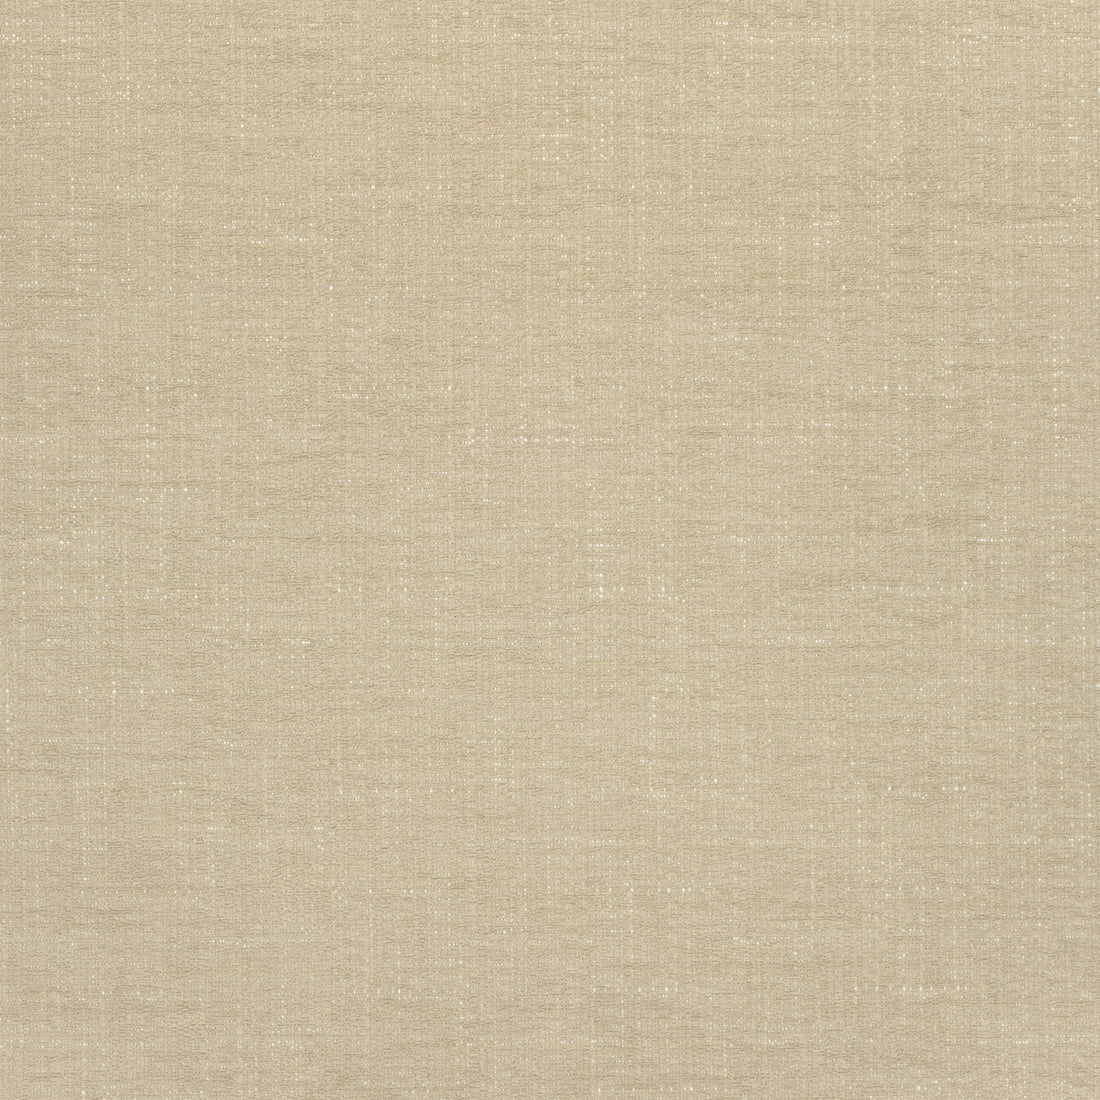 Vista fabric in sand color - pattern number W73402 - by Thibaut in the Landmark Textures collection